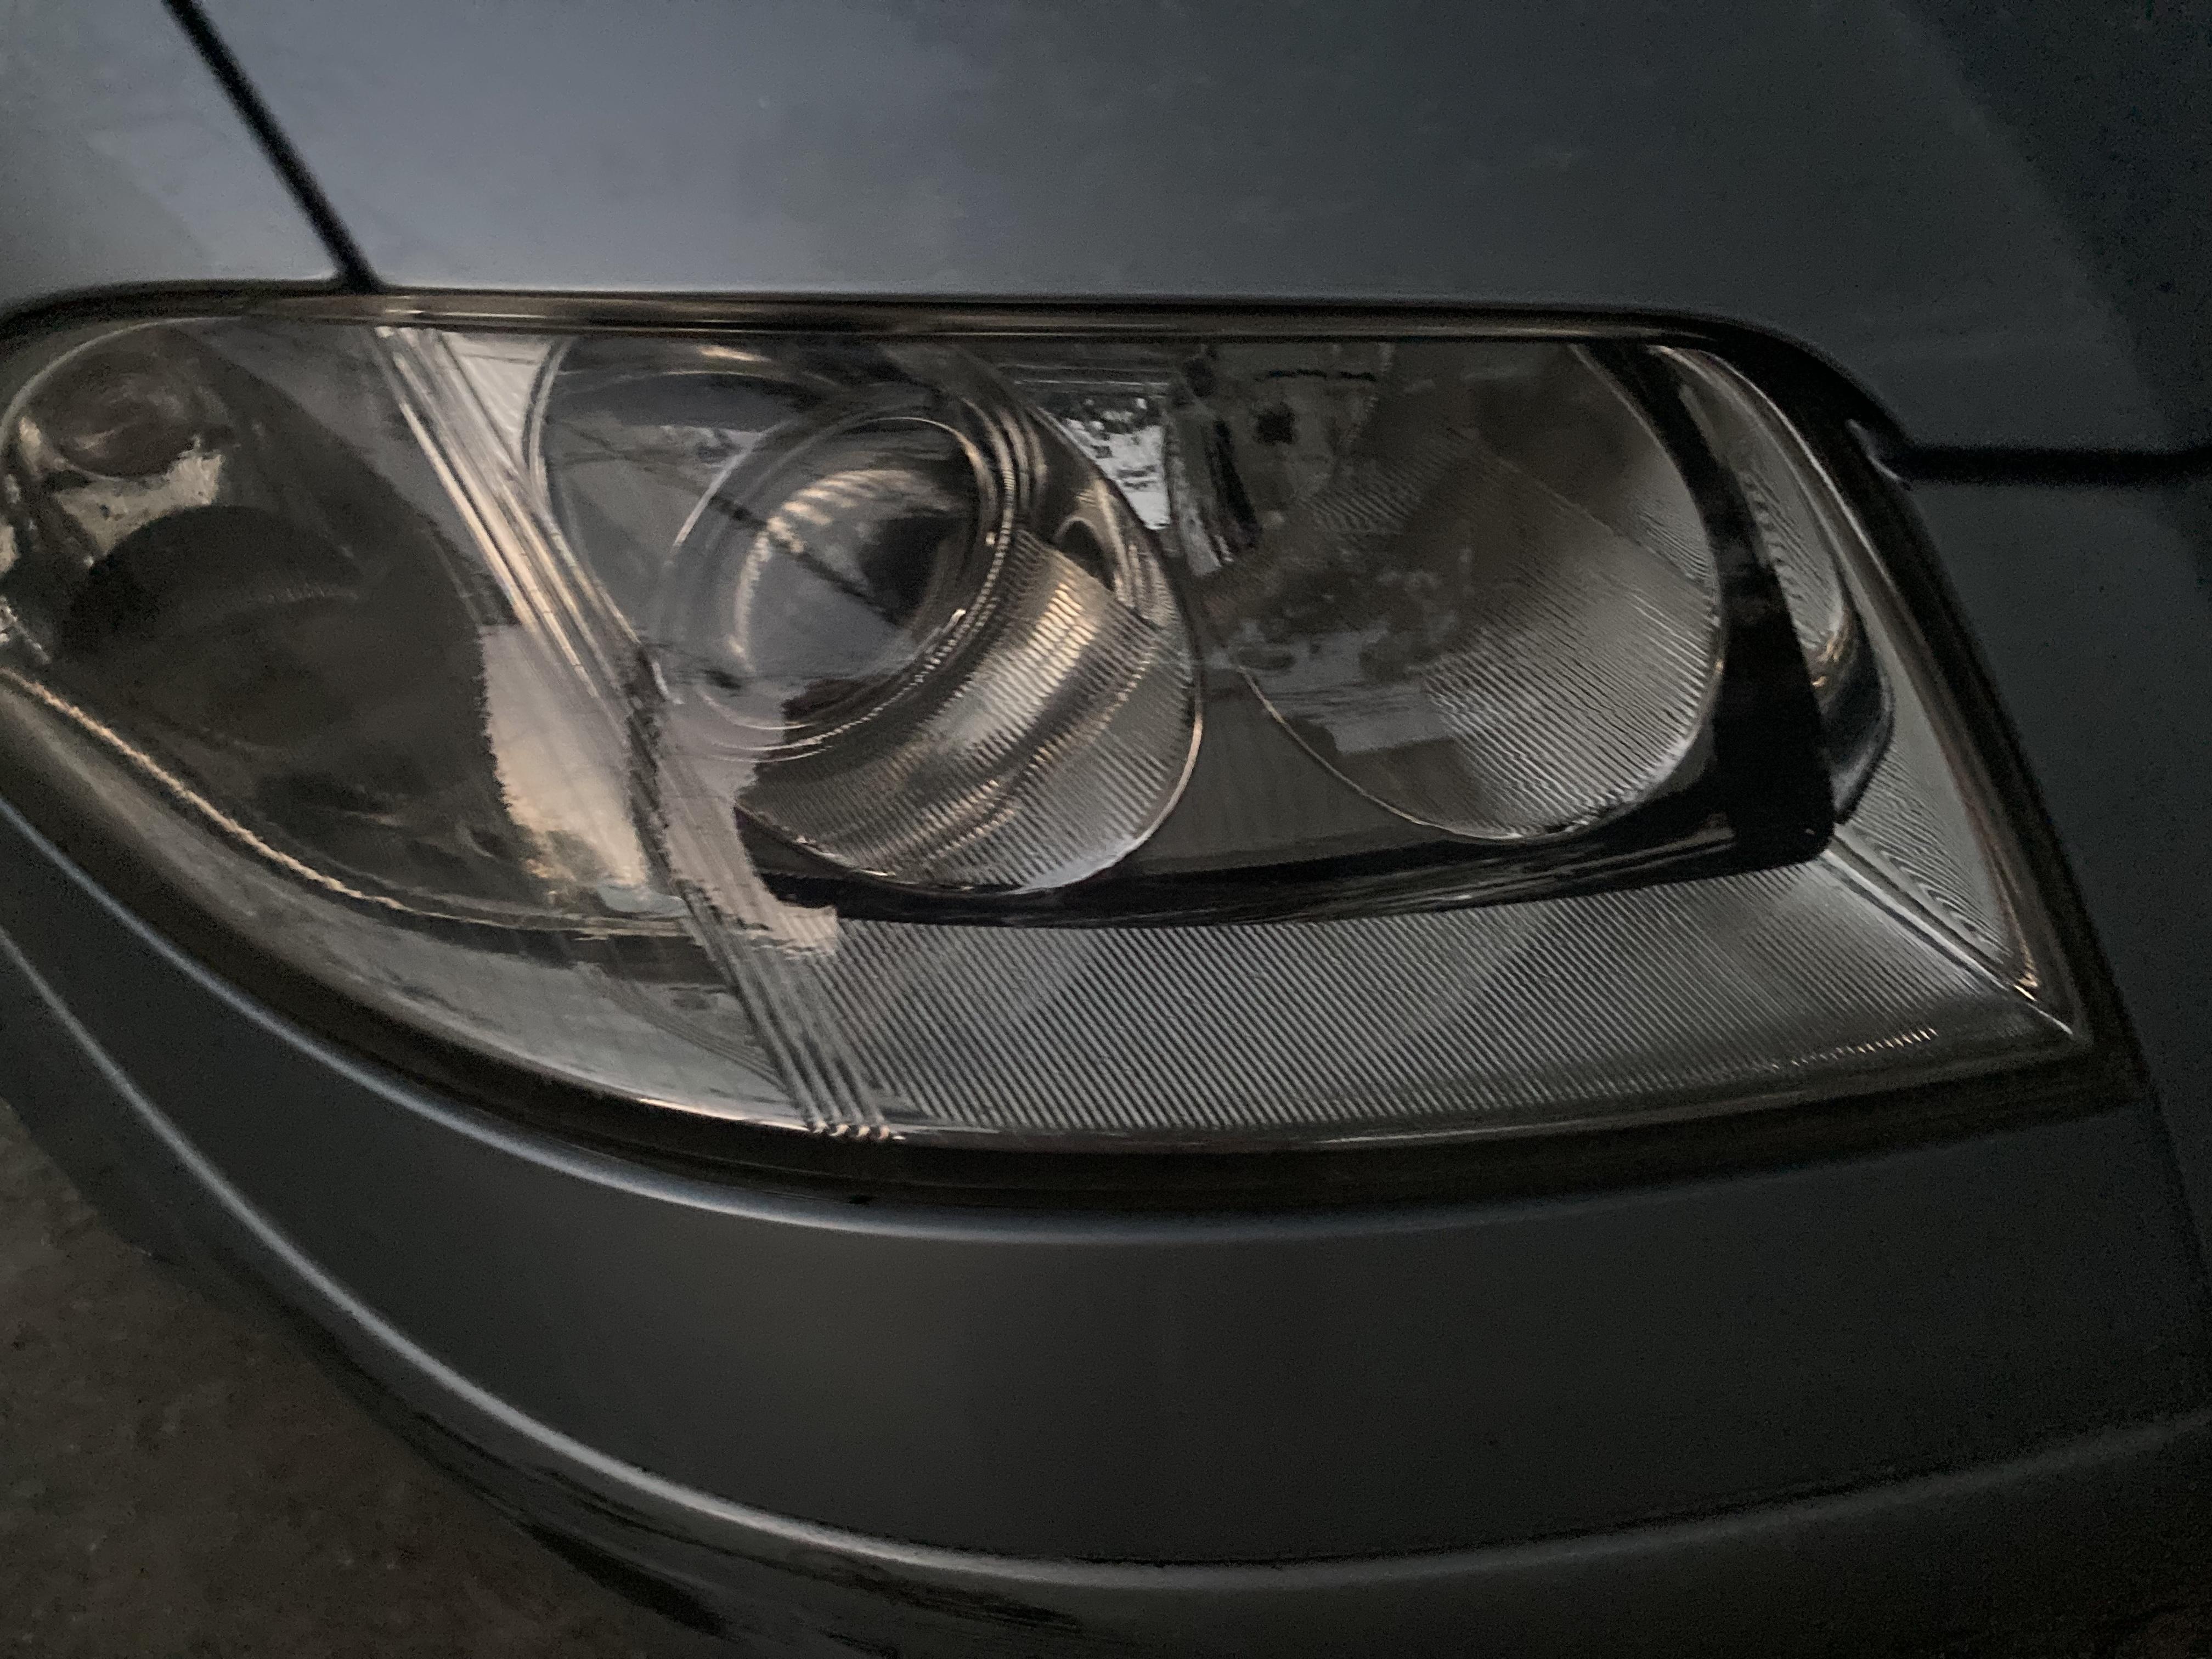 How To Restore Headlights/CLEARCOAT Lacquer FAIL 